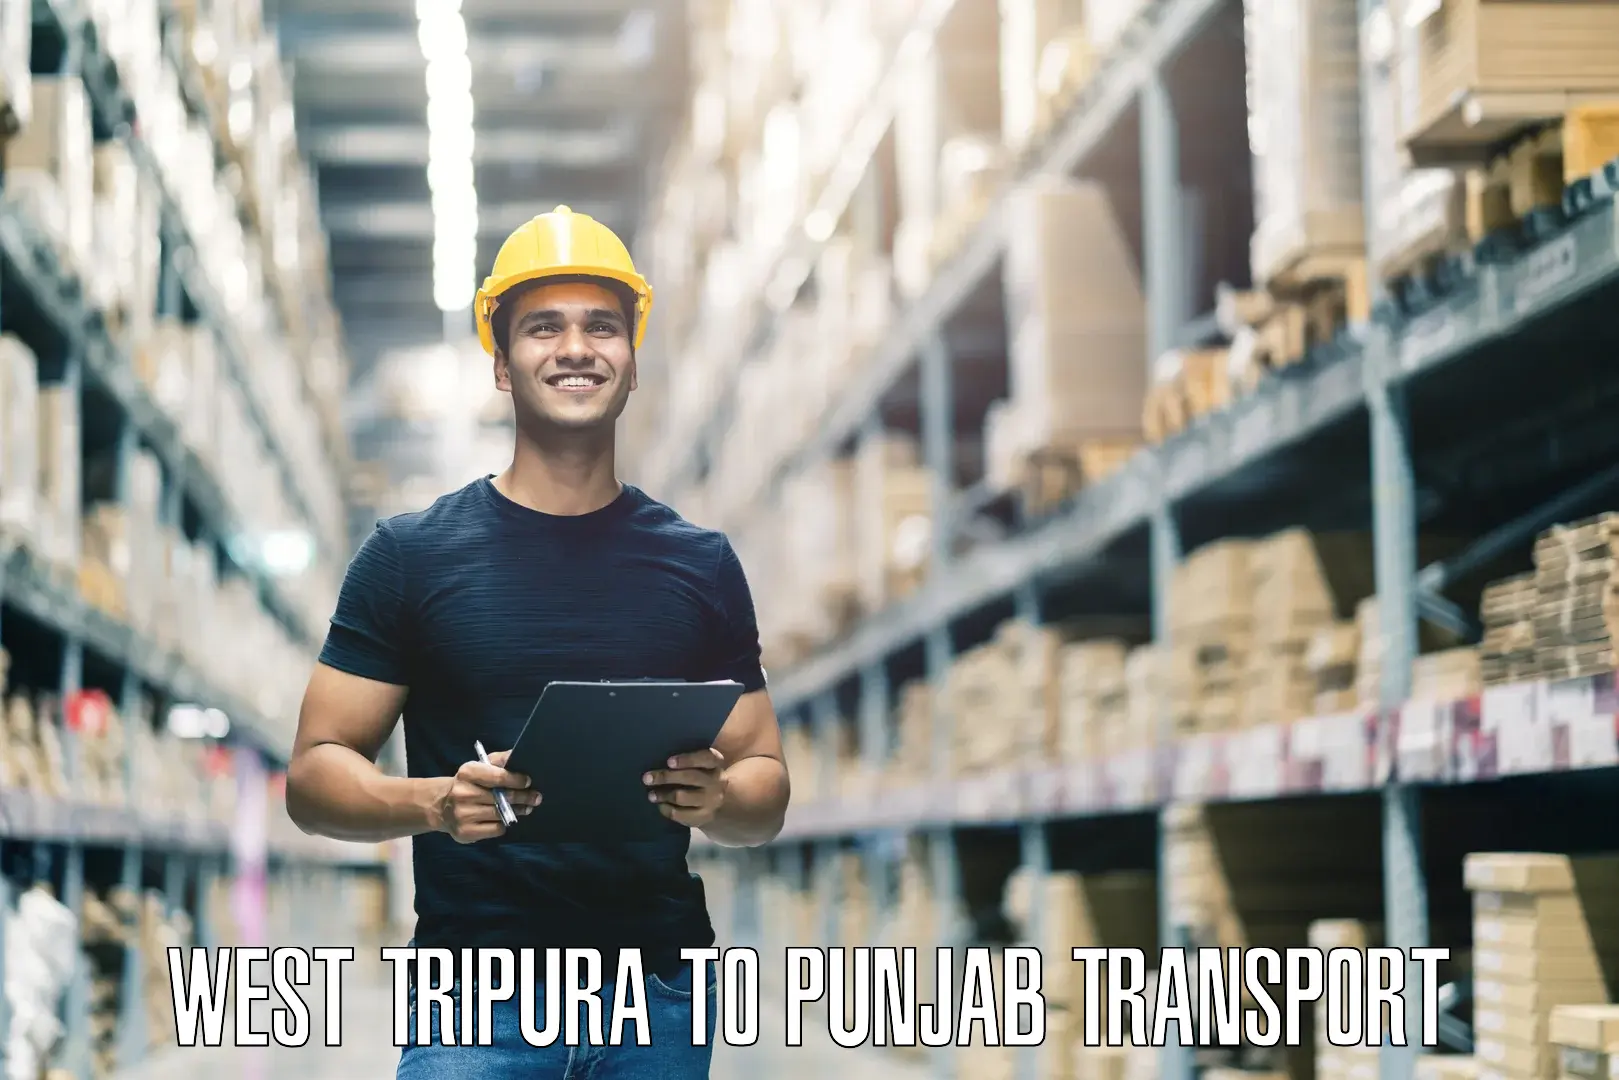 Package delivery services in West Tripura to Malerkotla